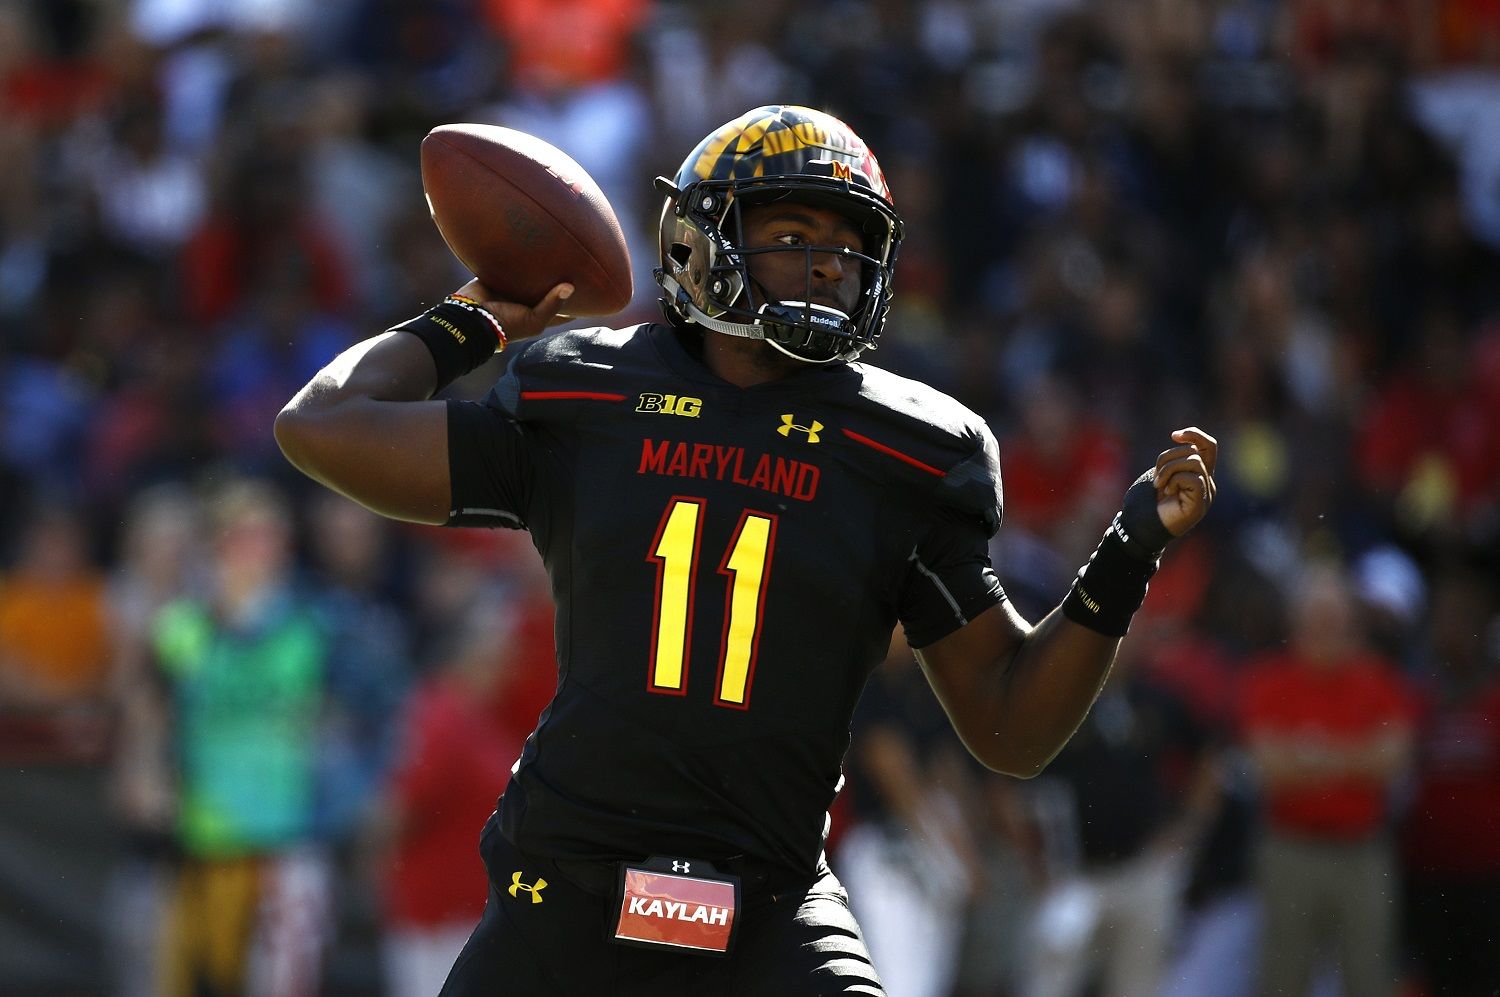 Quarterback Kasim Hill is one of two returning signal-callers who suffered a season-ending injury last year, but will look to stake his claim to the starting spot in 2018.  (AP Photo/Patrick Semansky, File)